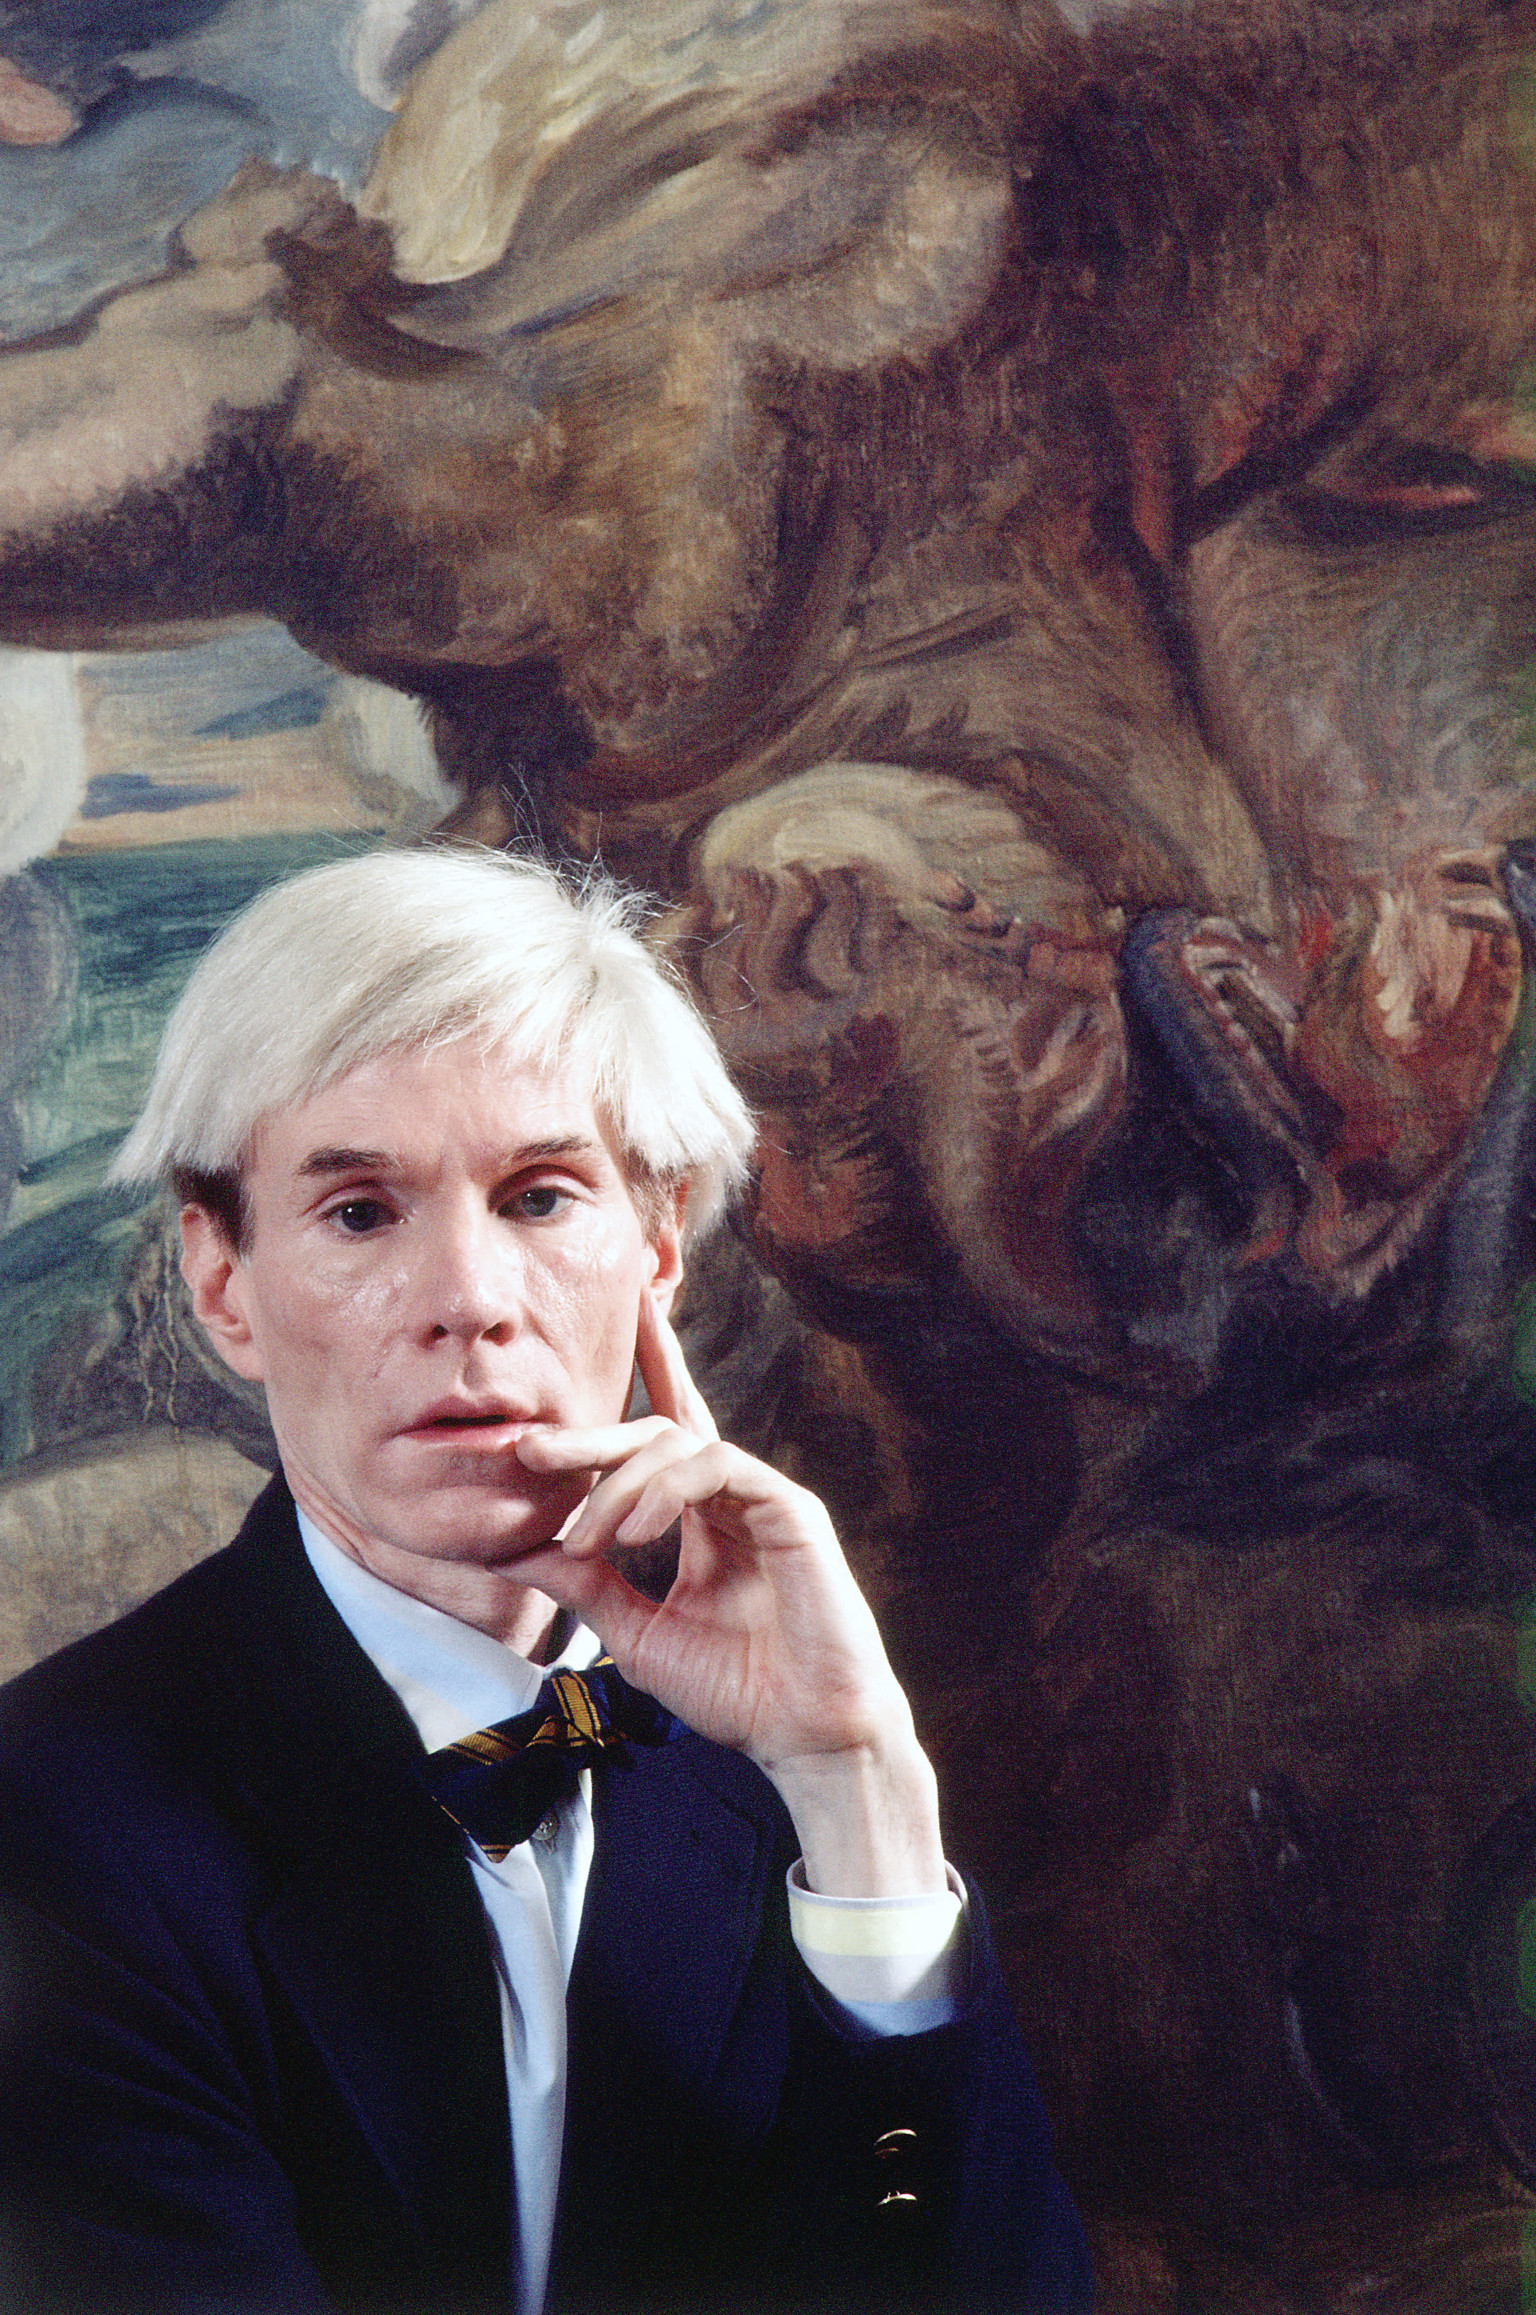 andy warhol museum donation request